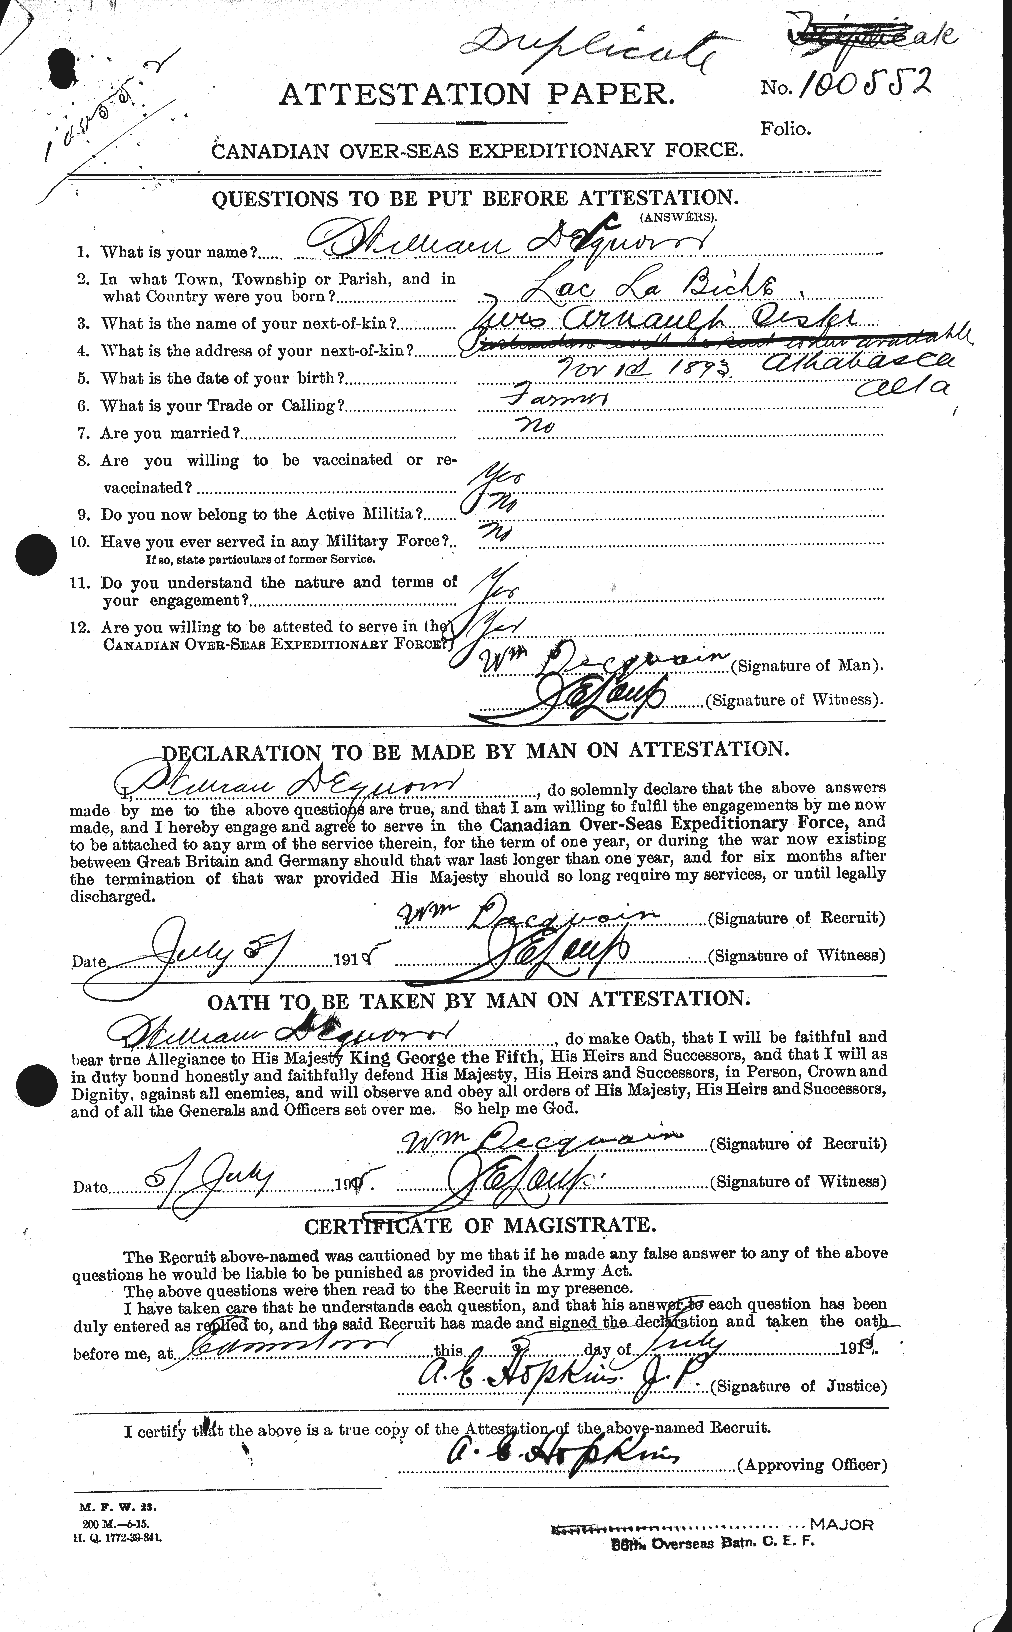 Personnel Records of the First World War - CEF 285658a